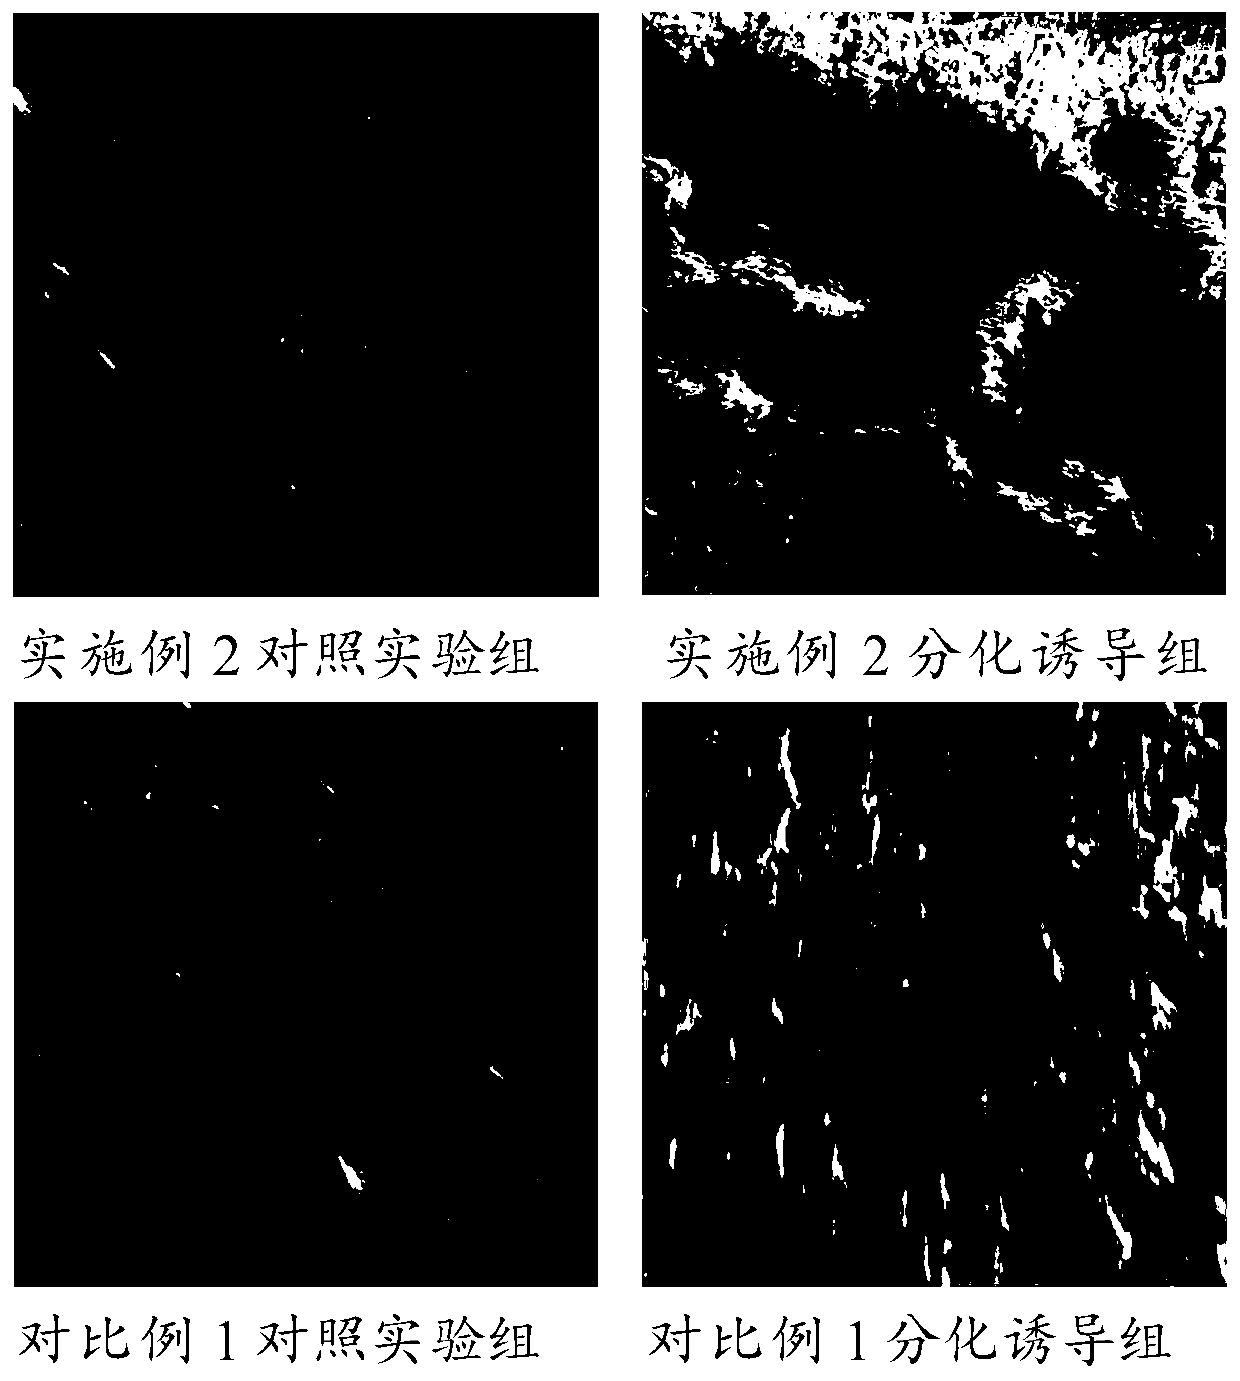 Culture medium for inducing differentiation of dental pulp stem cells into osteoblasts, and preparation method and application of culture midium